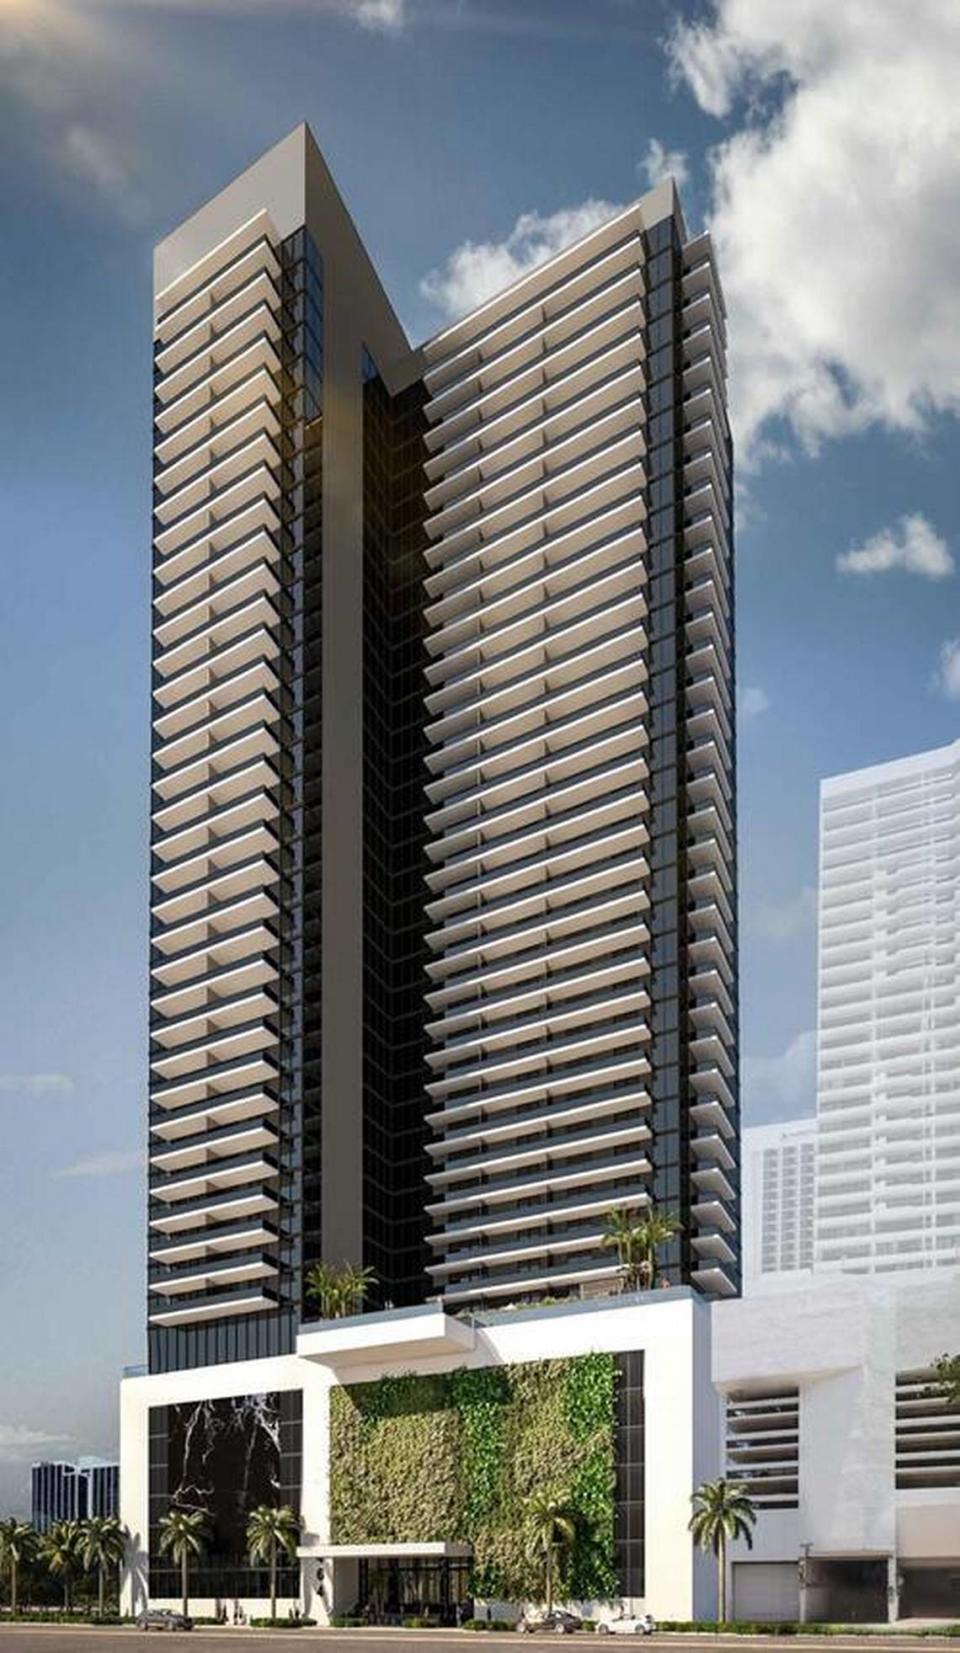 A rendering of the $225 million high-rise to be developed on the parking lot and adjacent vacant lot of the historic Trinity Episcopal Cathedral in Edgewater, Miami.